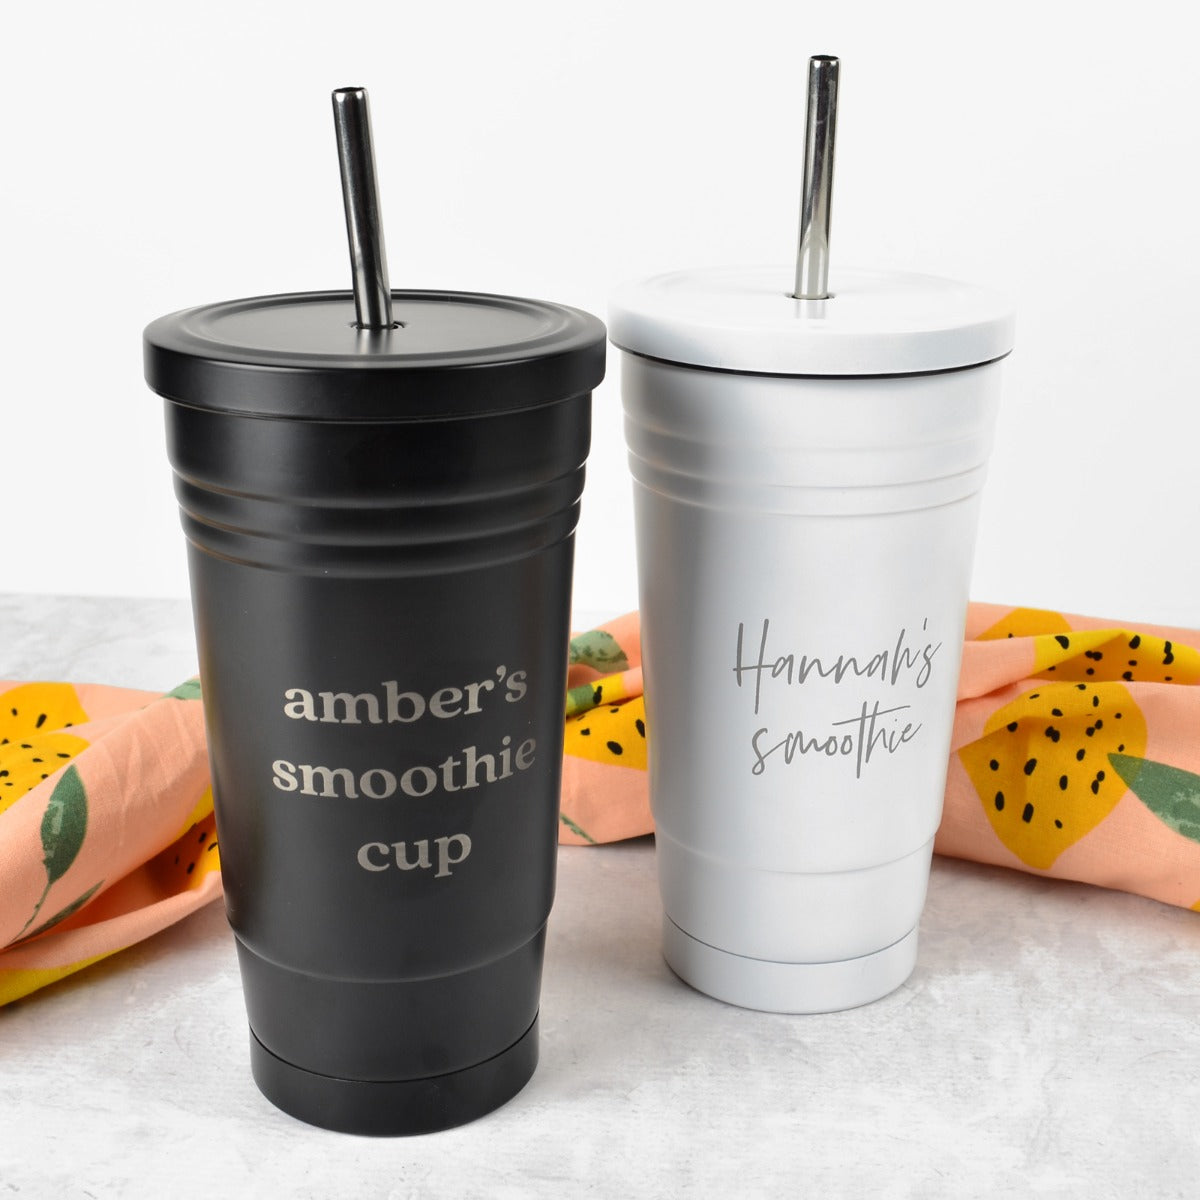 Engraved black or white smoothie cup with metal straw